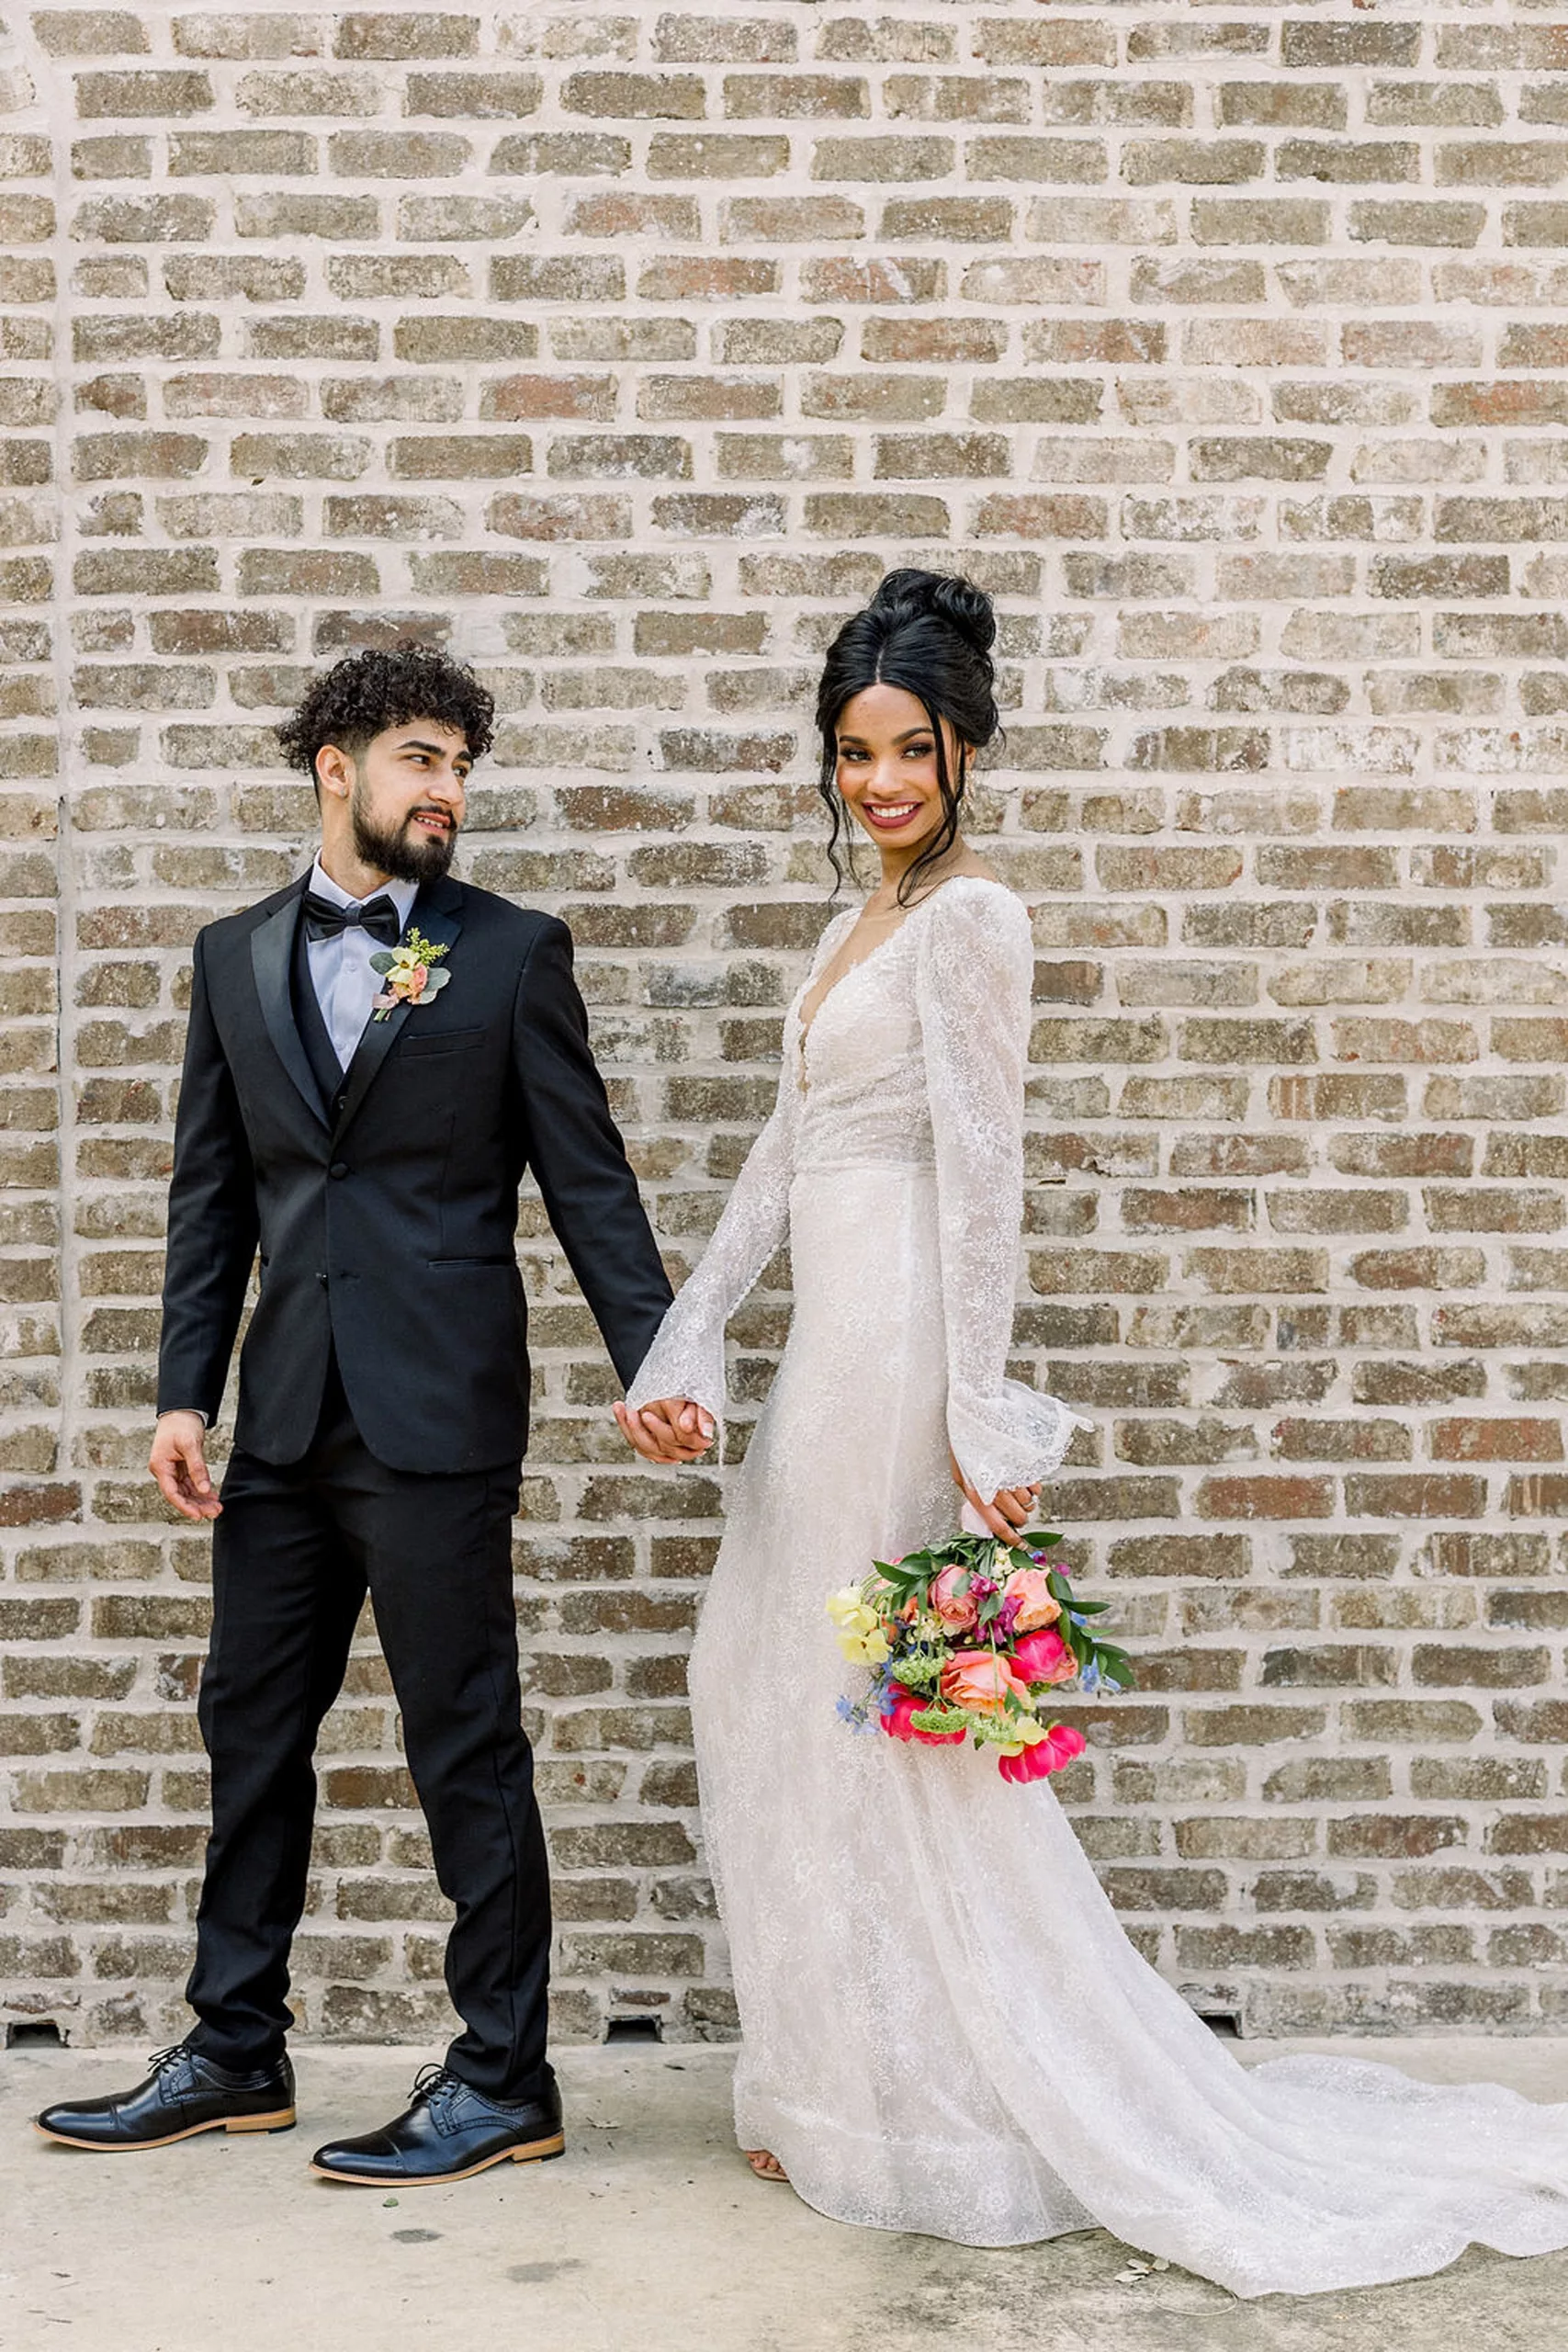 A groom in a black tuxedo leads his bride in a lace dress by the hand around a brick wall at the iron manor wedding venue